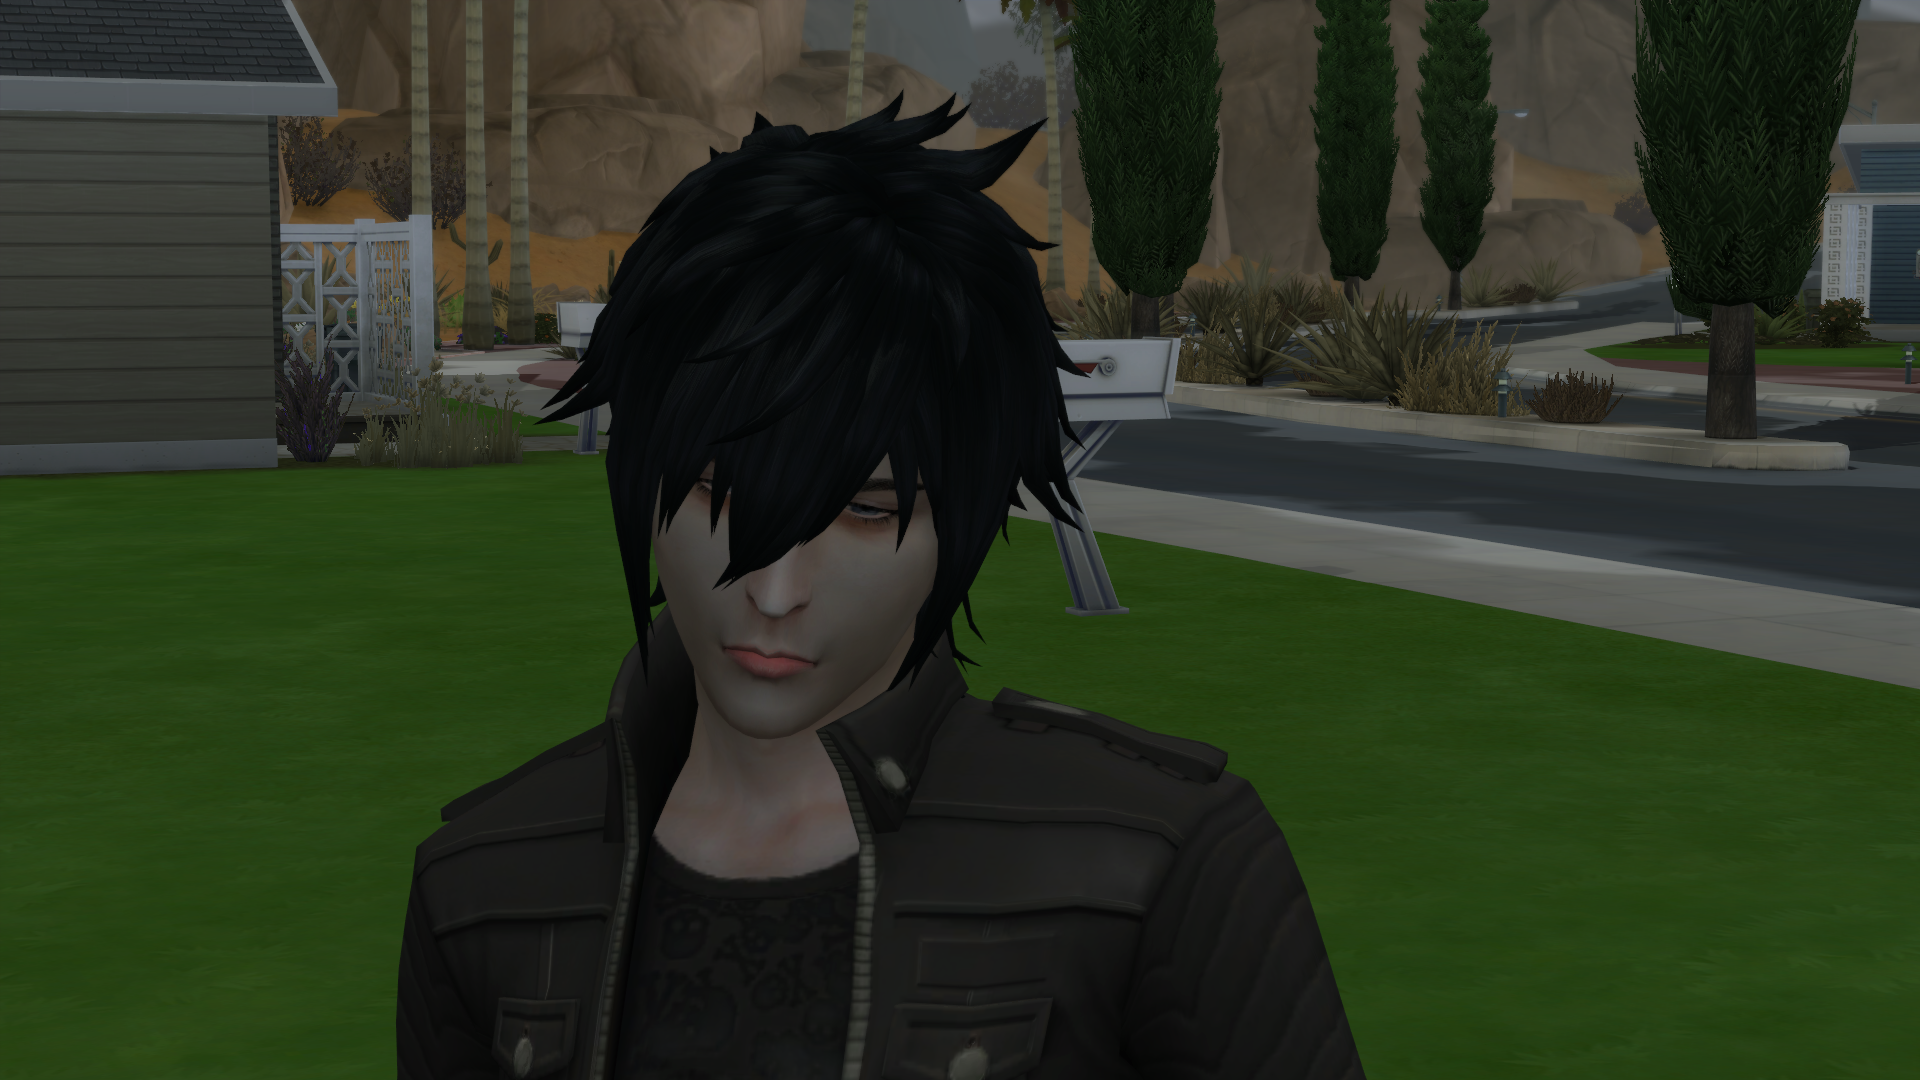 Noctis.png.64b7bbba1c0b5b30524be97bea421be7.png